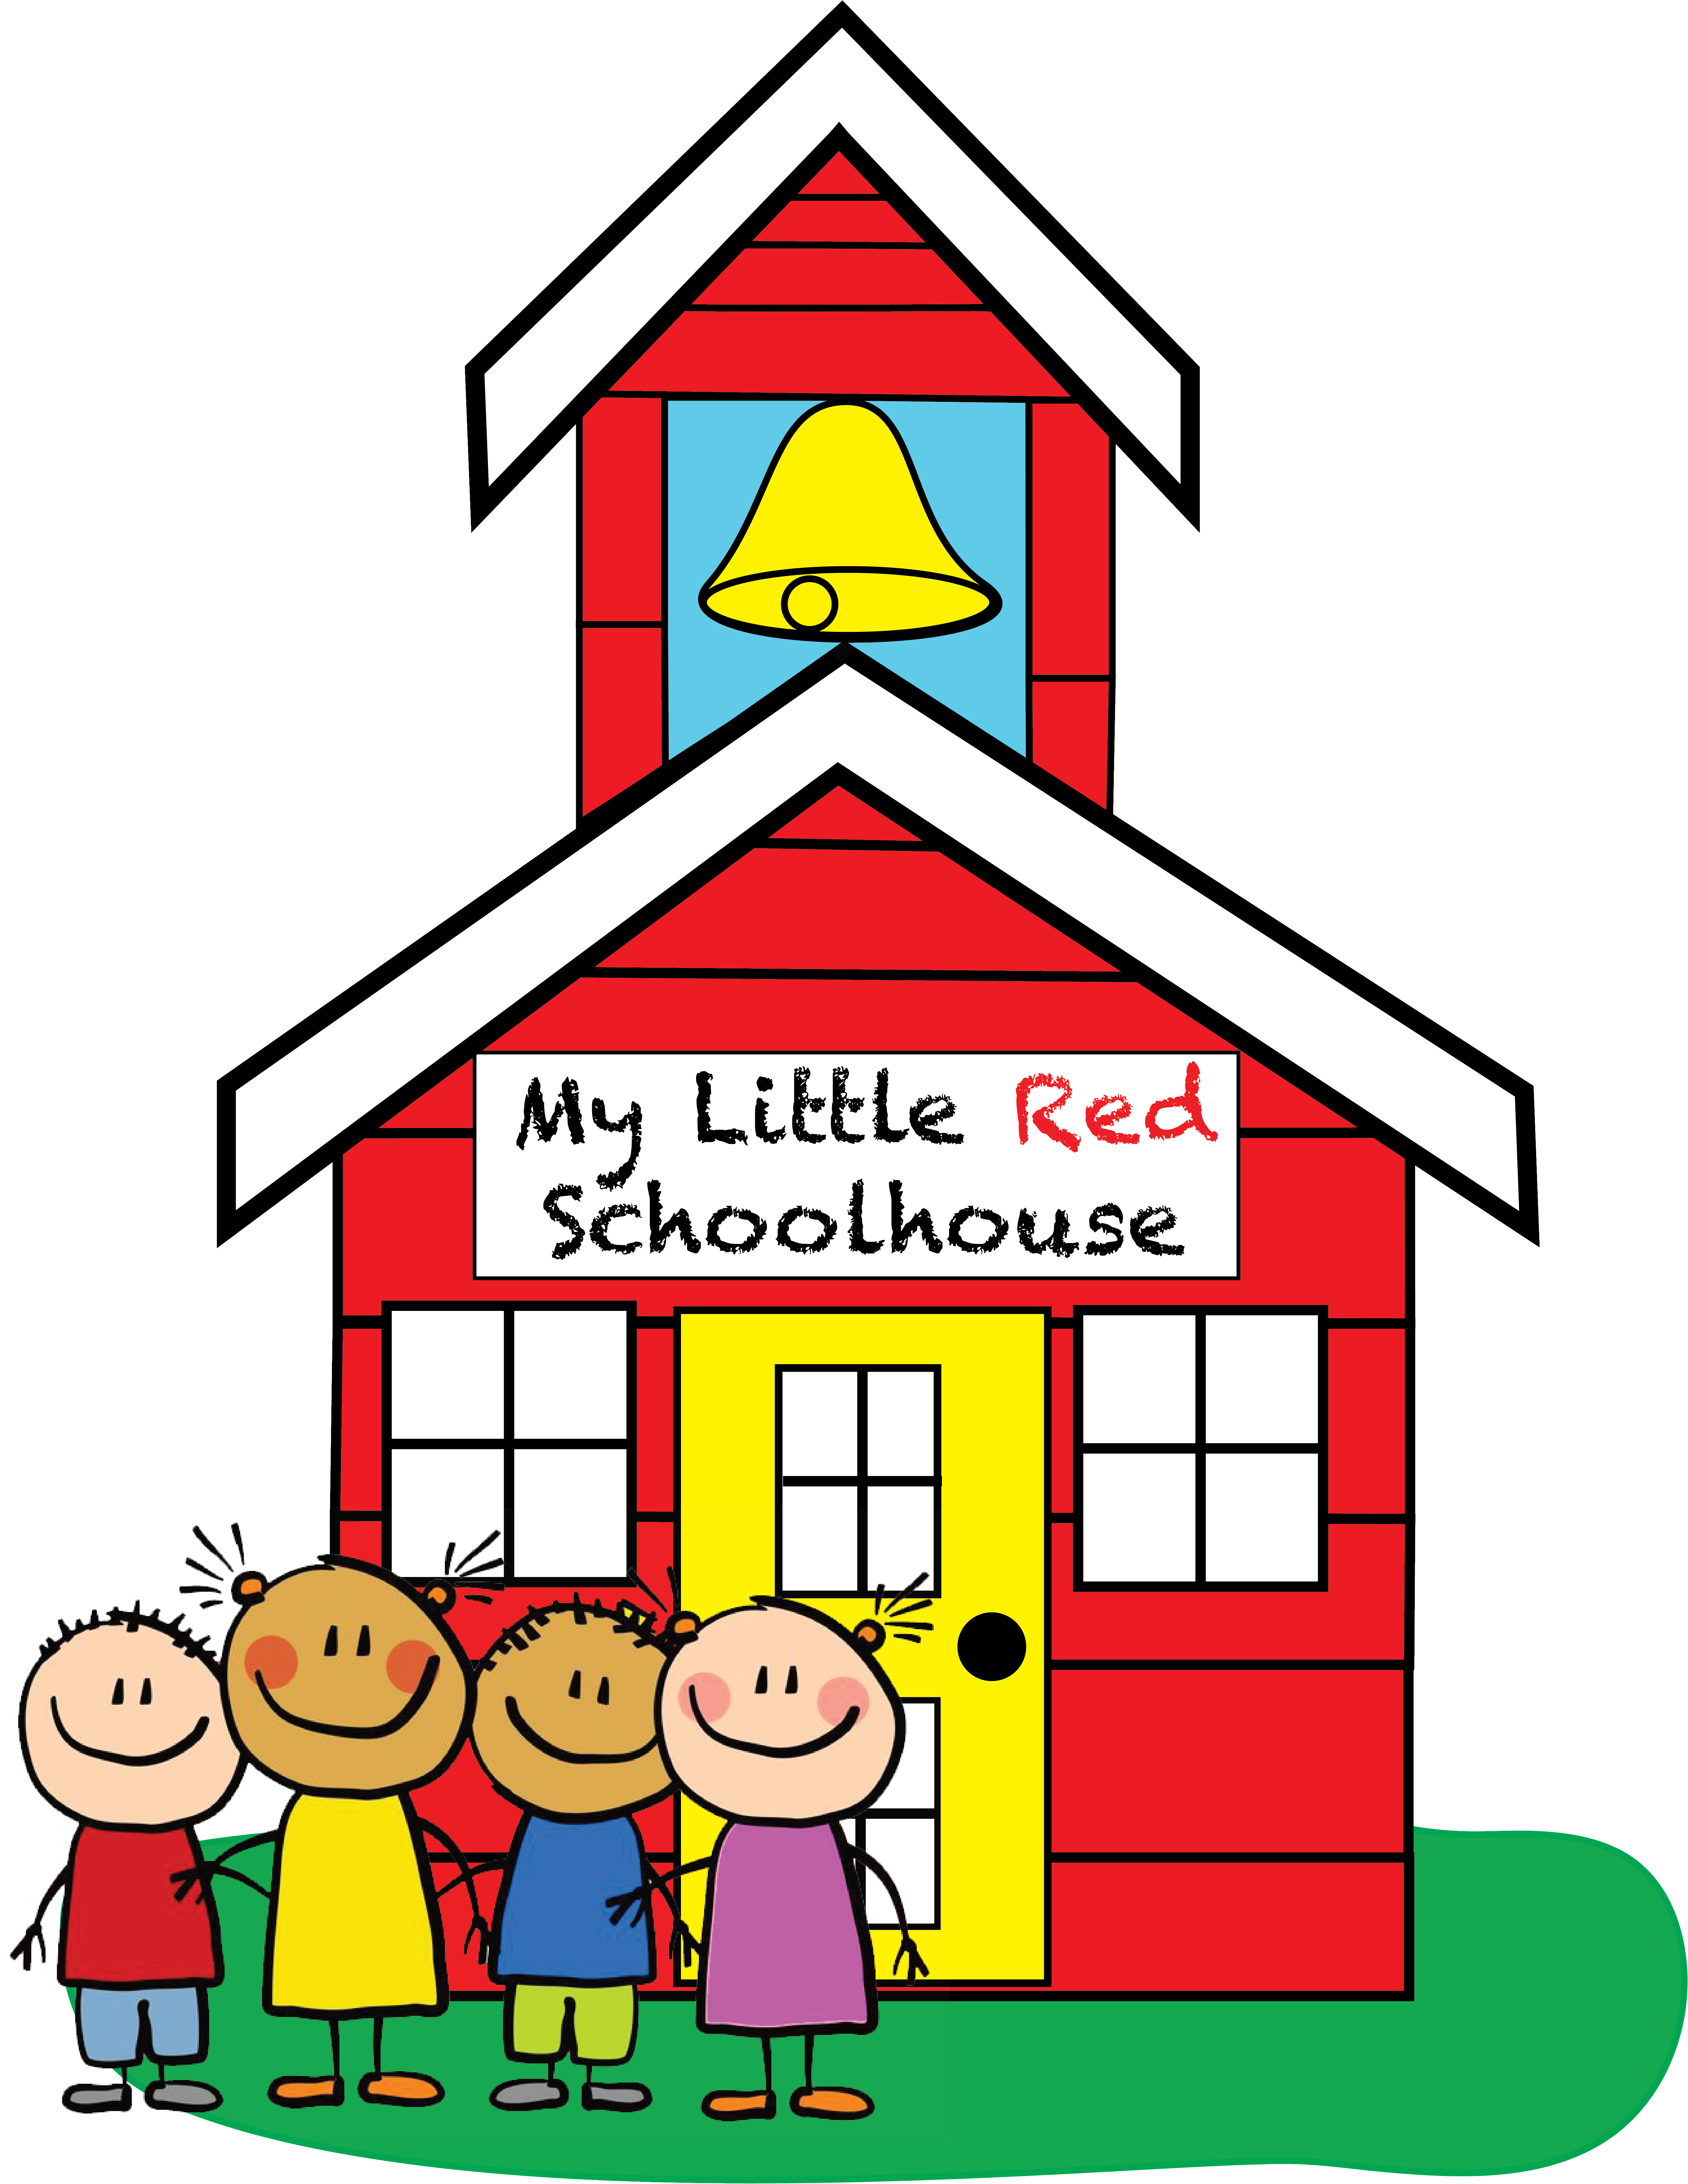 schoolhouse clipart little red schoolhouse